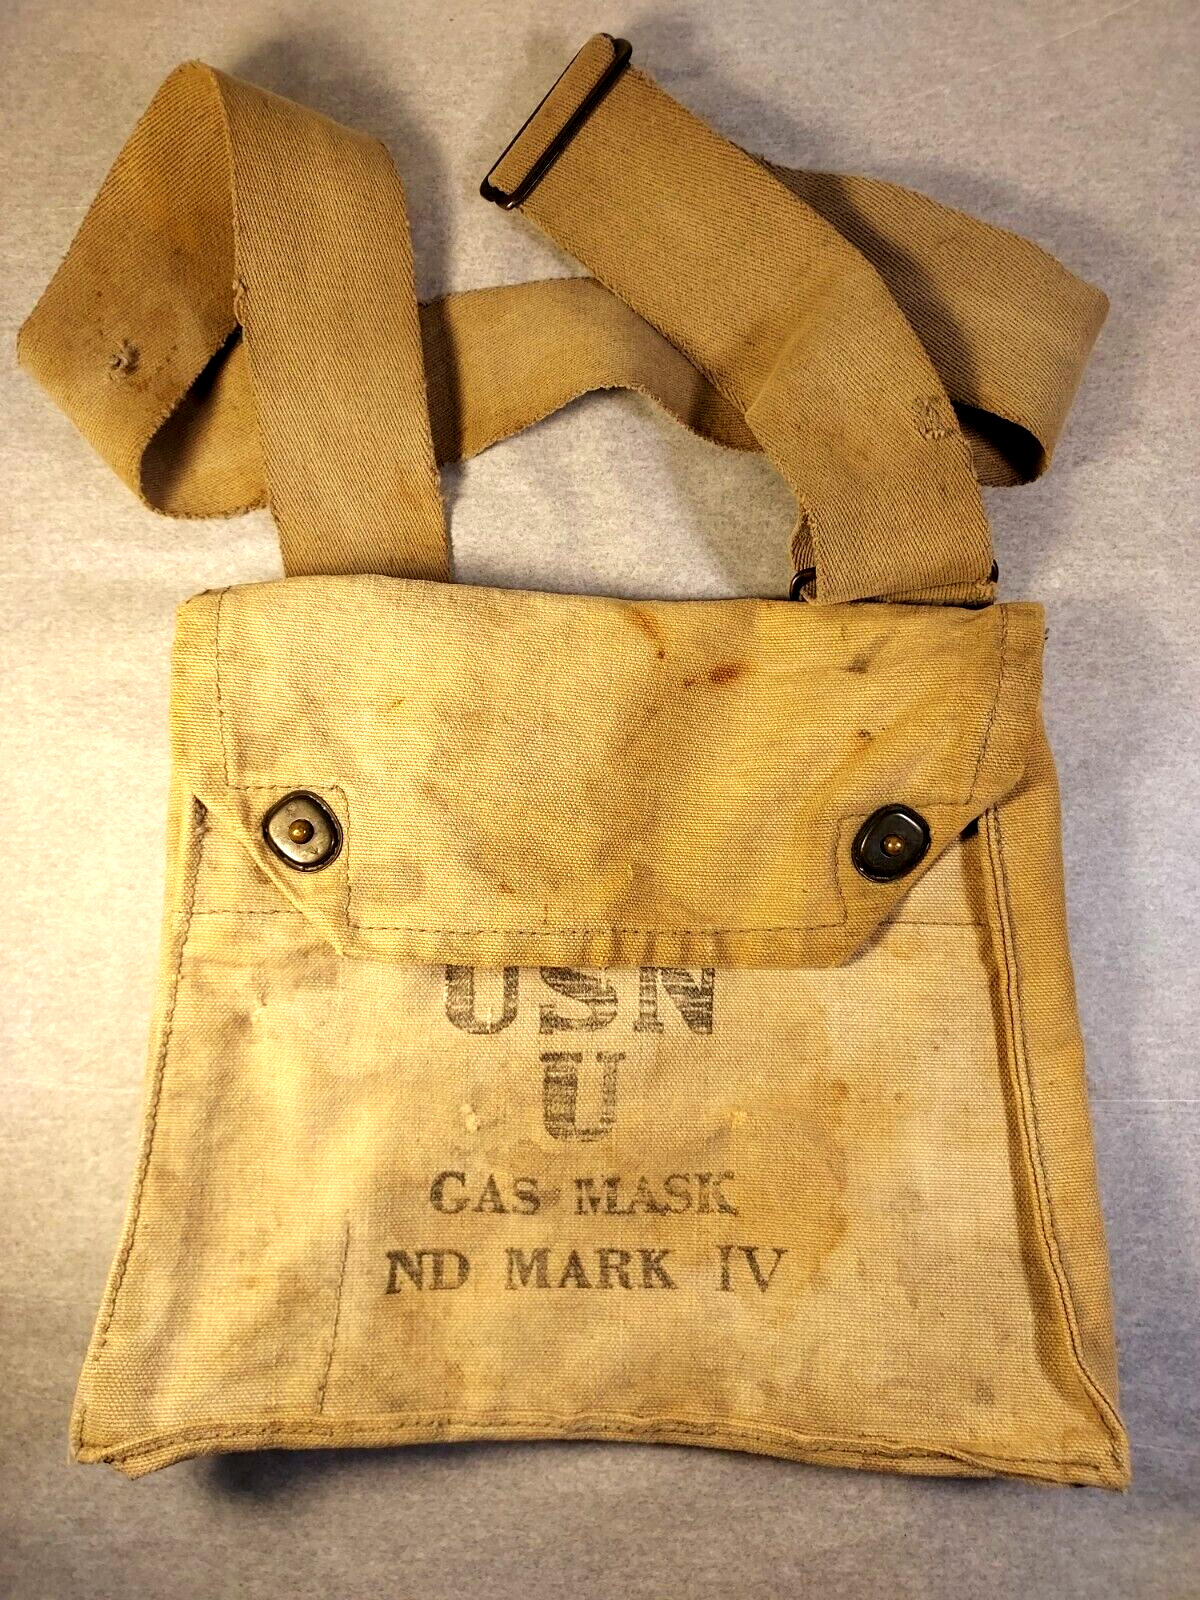 Vintage 1940s WWII US Navy USN Military Canvas Field Bag for Gas Mask ND Mark IV